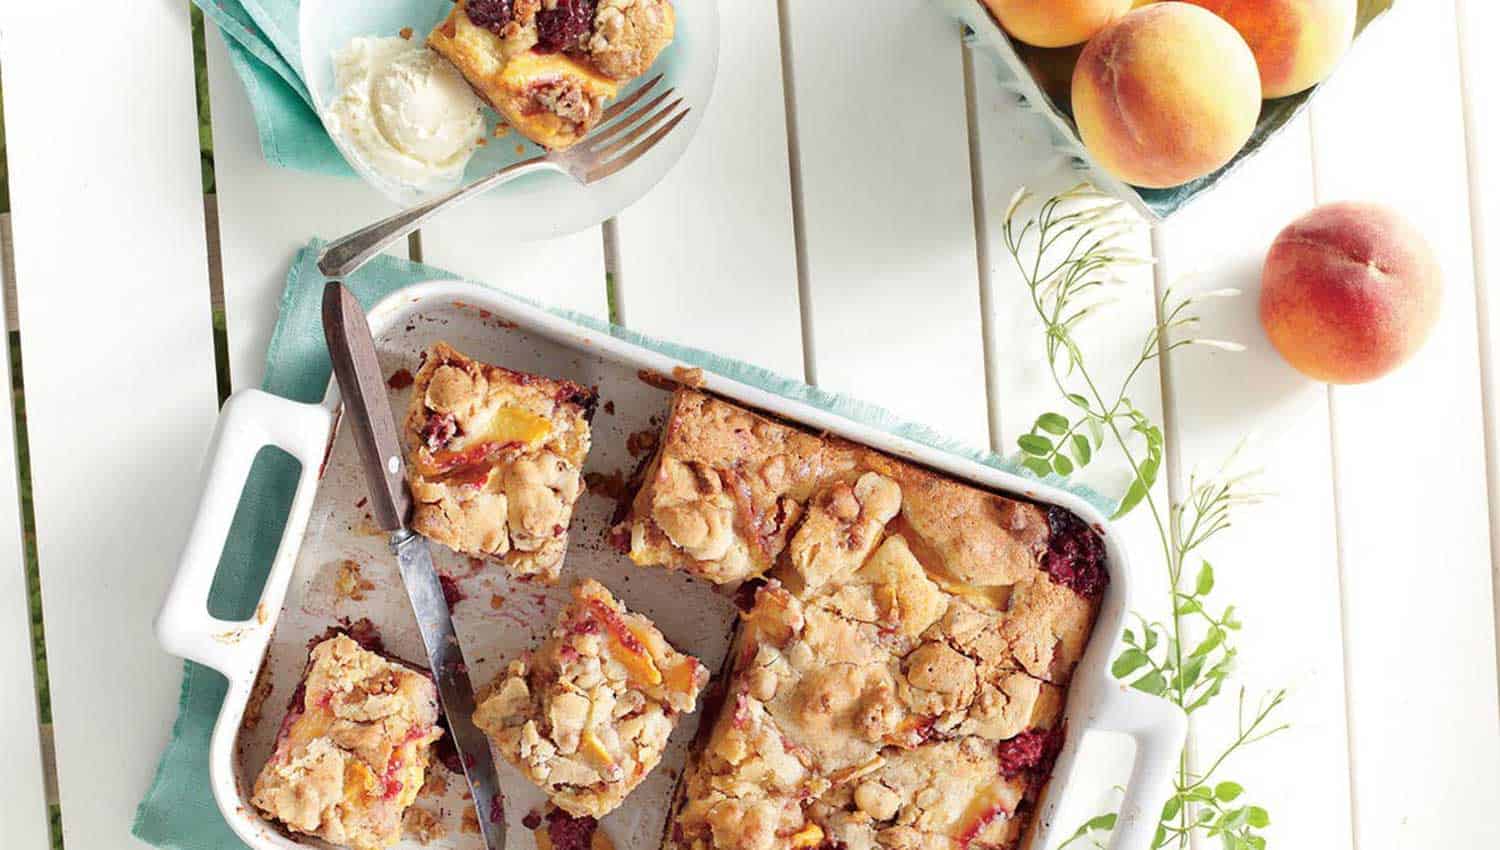 On a white picnic table sits peaches alongside a baking dish of peach cobbler